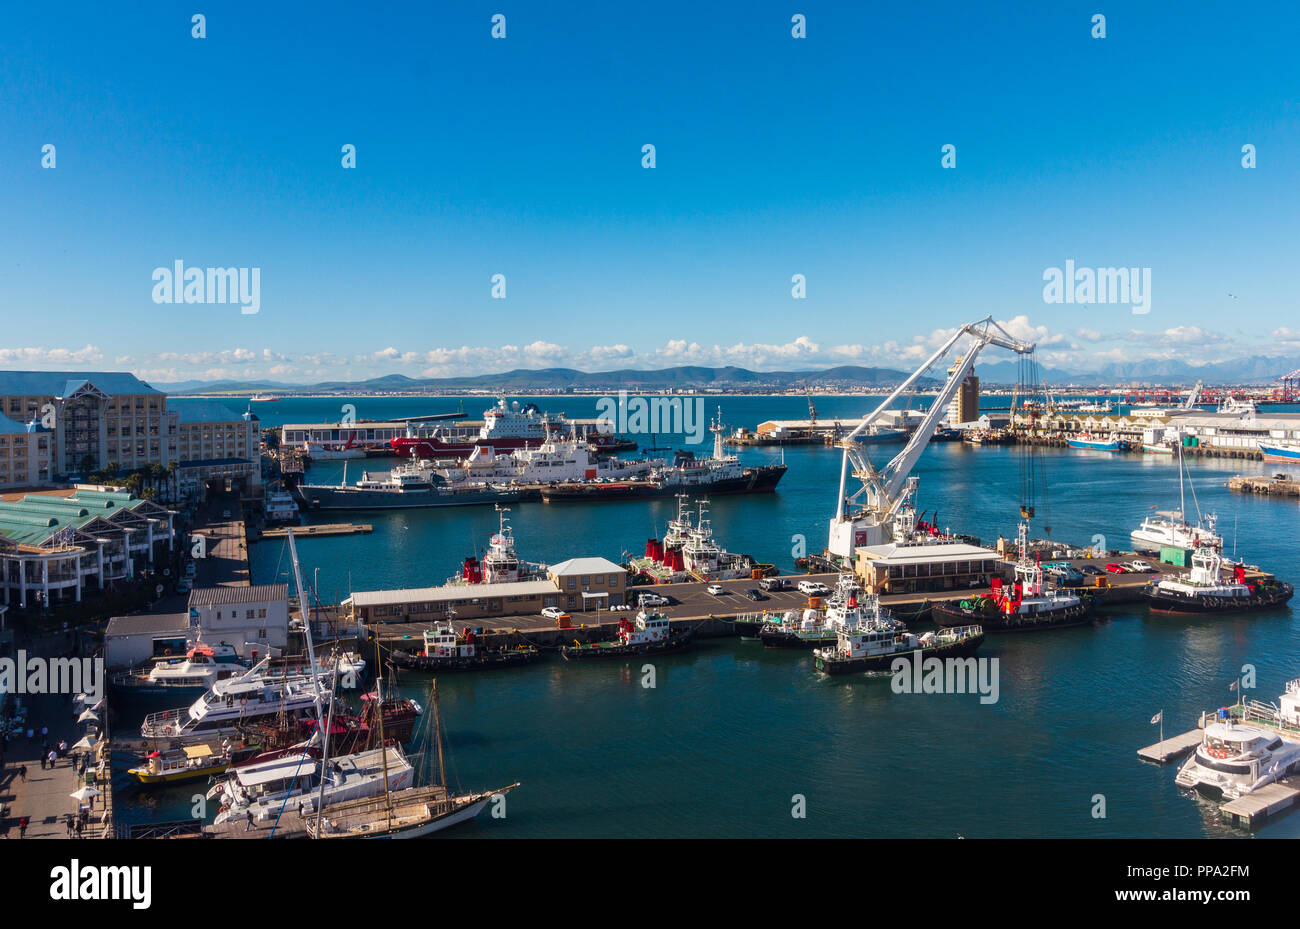 Aerial view of Cape Town waterfront, various types of nautical vessels docked in the harbor. Stock Photo